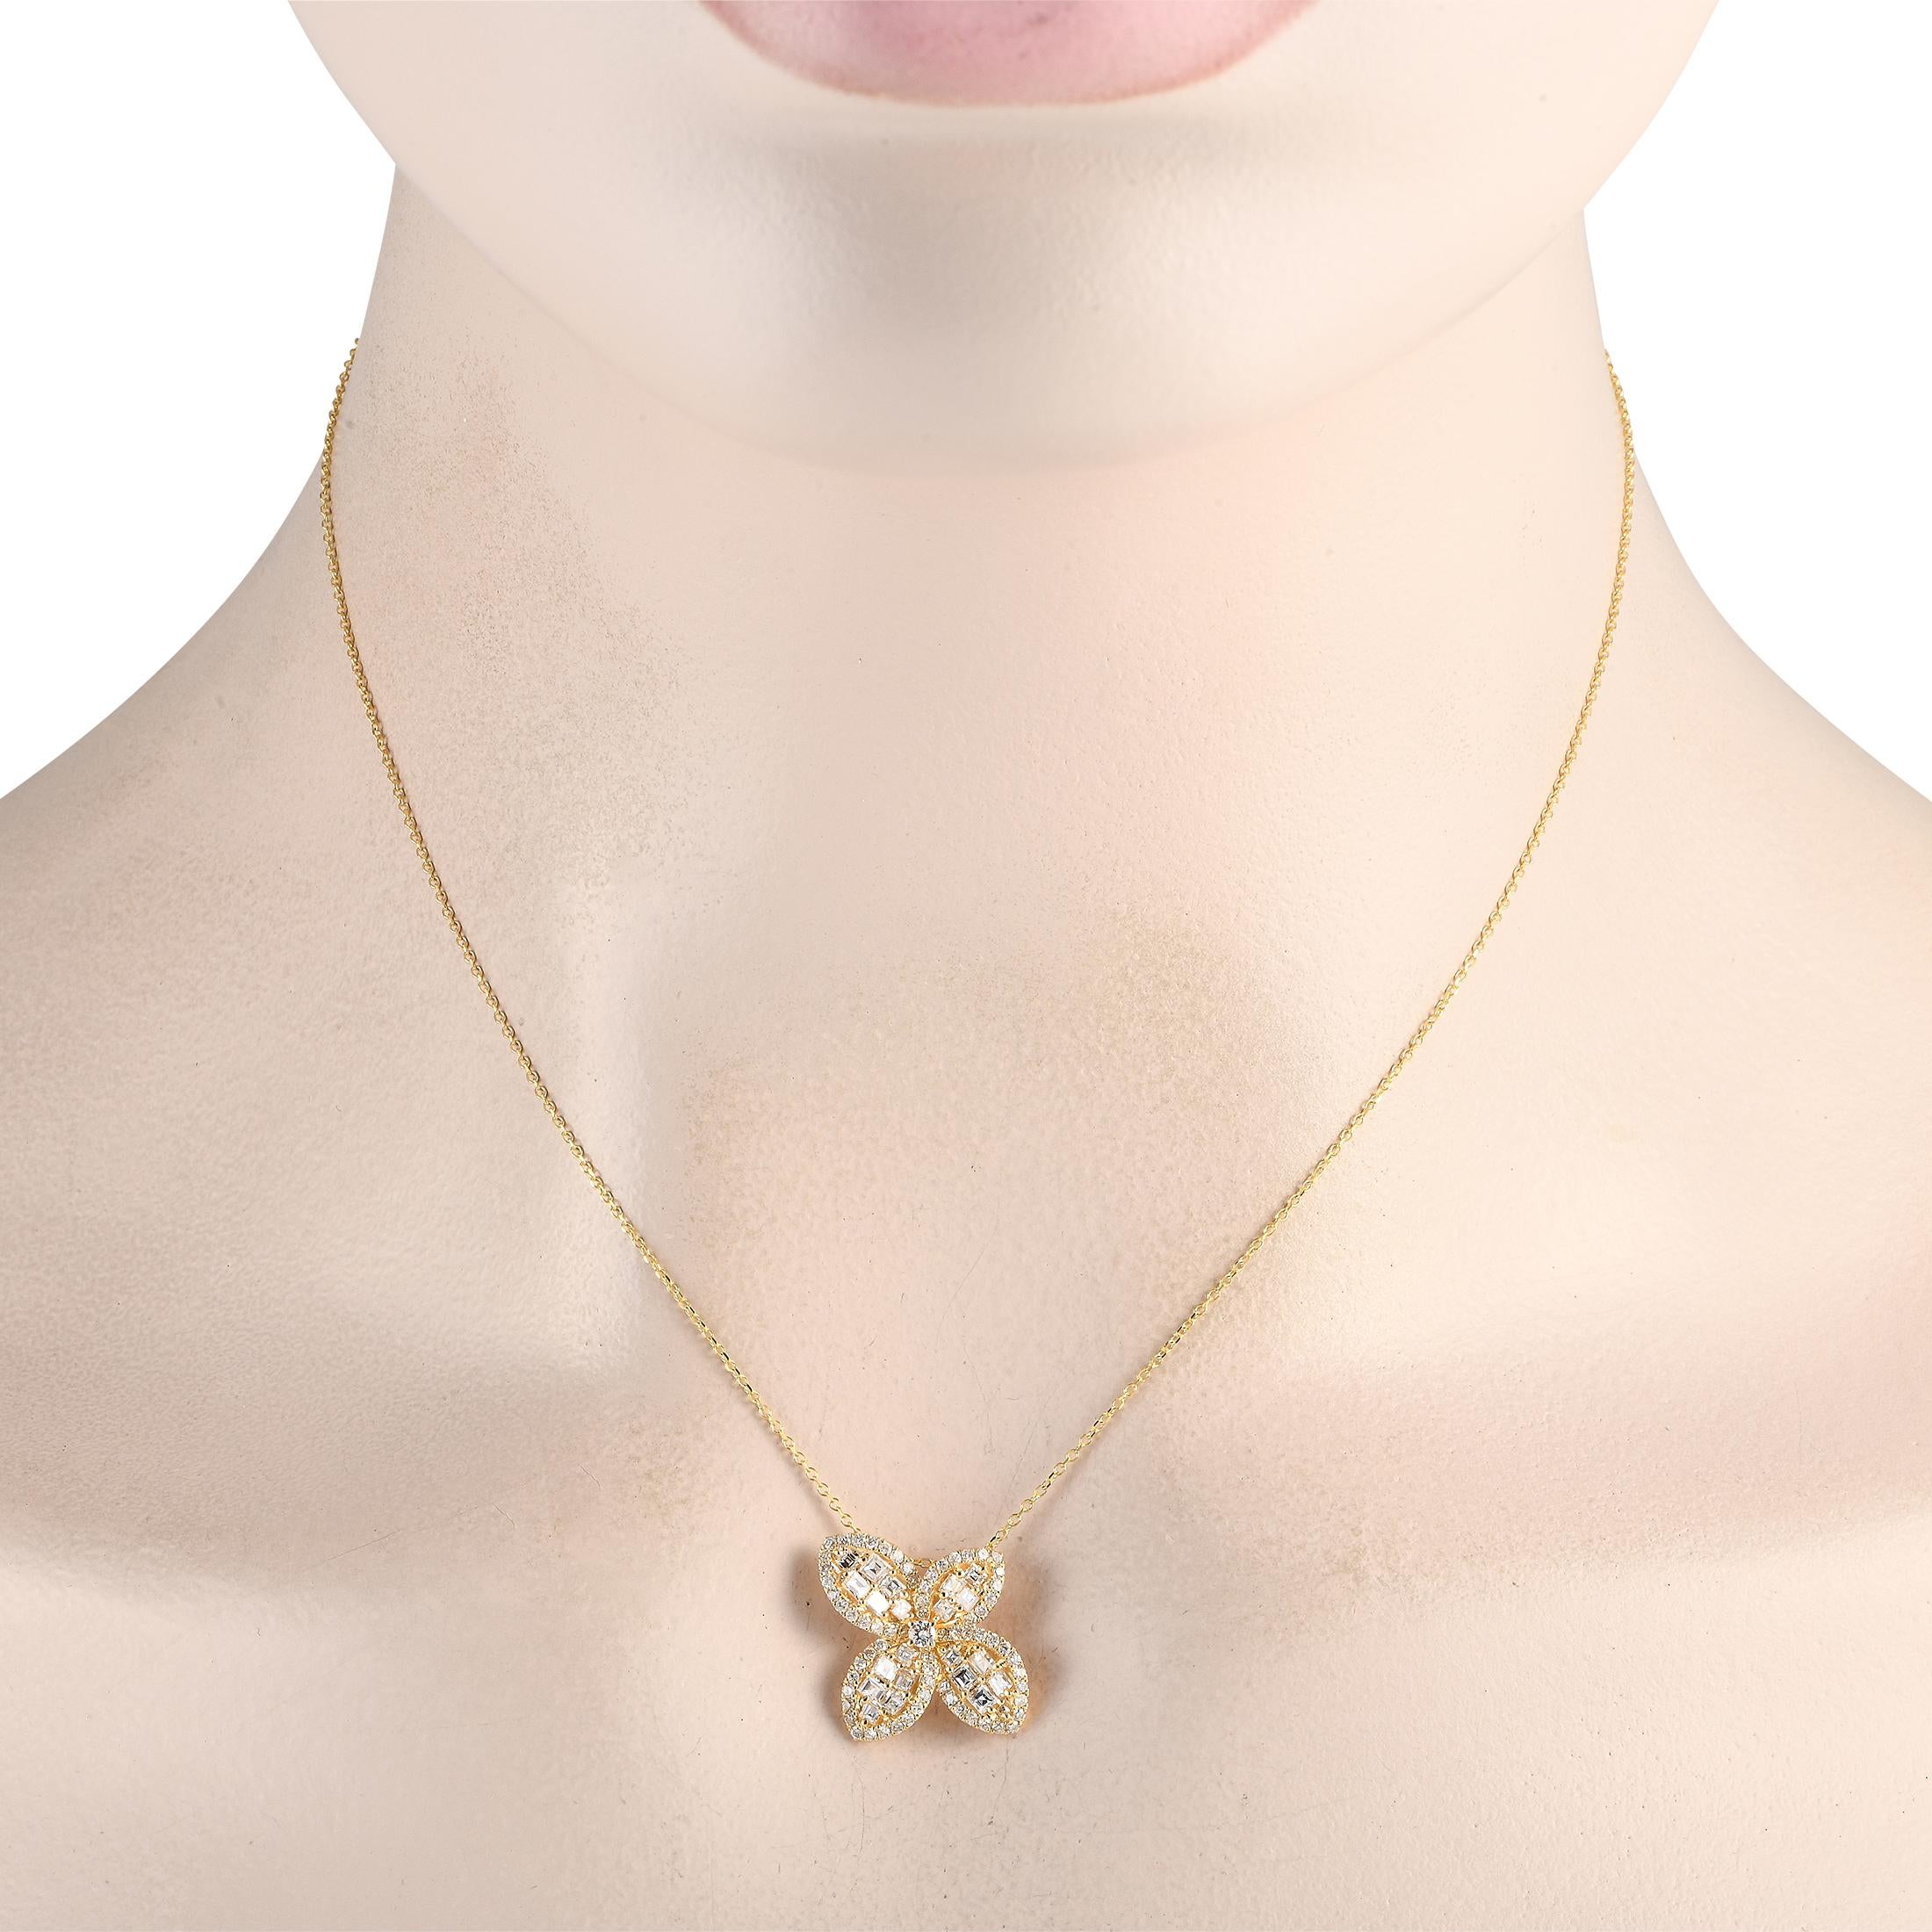 An abstract floral pendant gives this elegant 18K yellow gold necklace a touch of artistic edge. Crafted from 18K yellow gold, the pendant measures 0.65 round and is suspended from a sleek 16 chain. Asscher-cut diamonds totaling 0.70 carats and